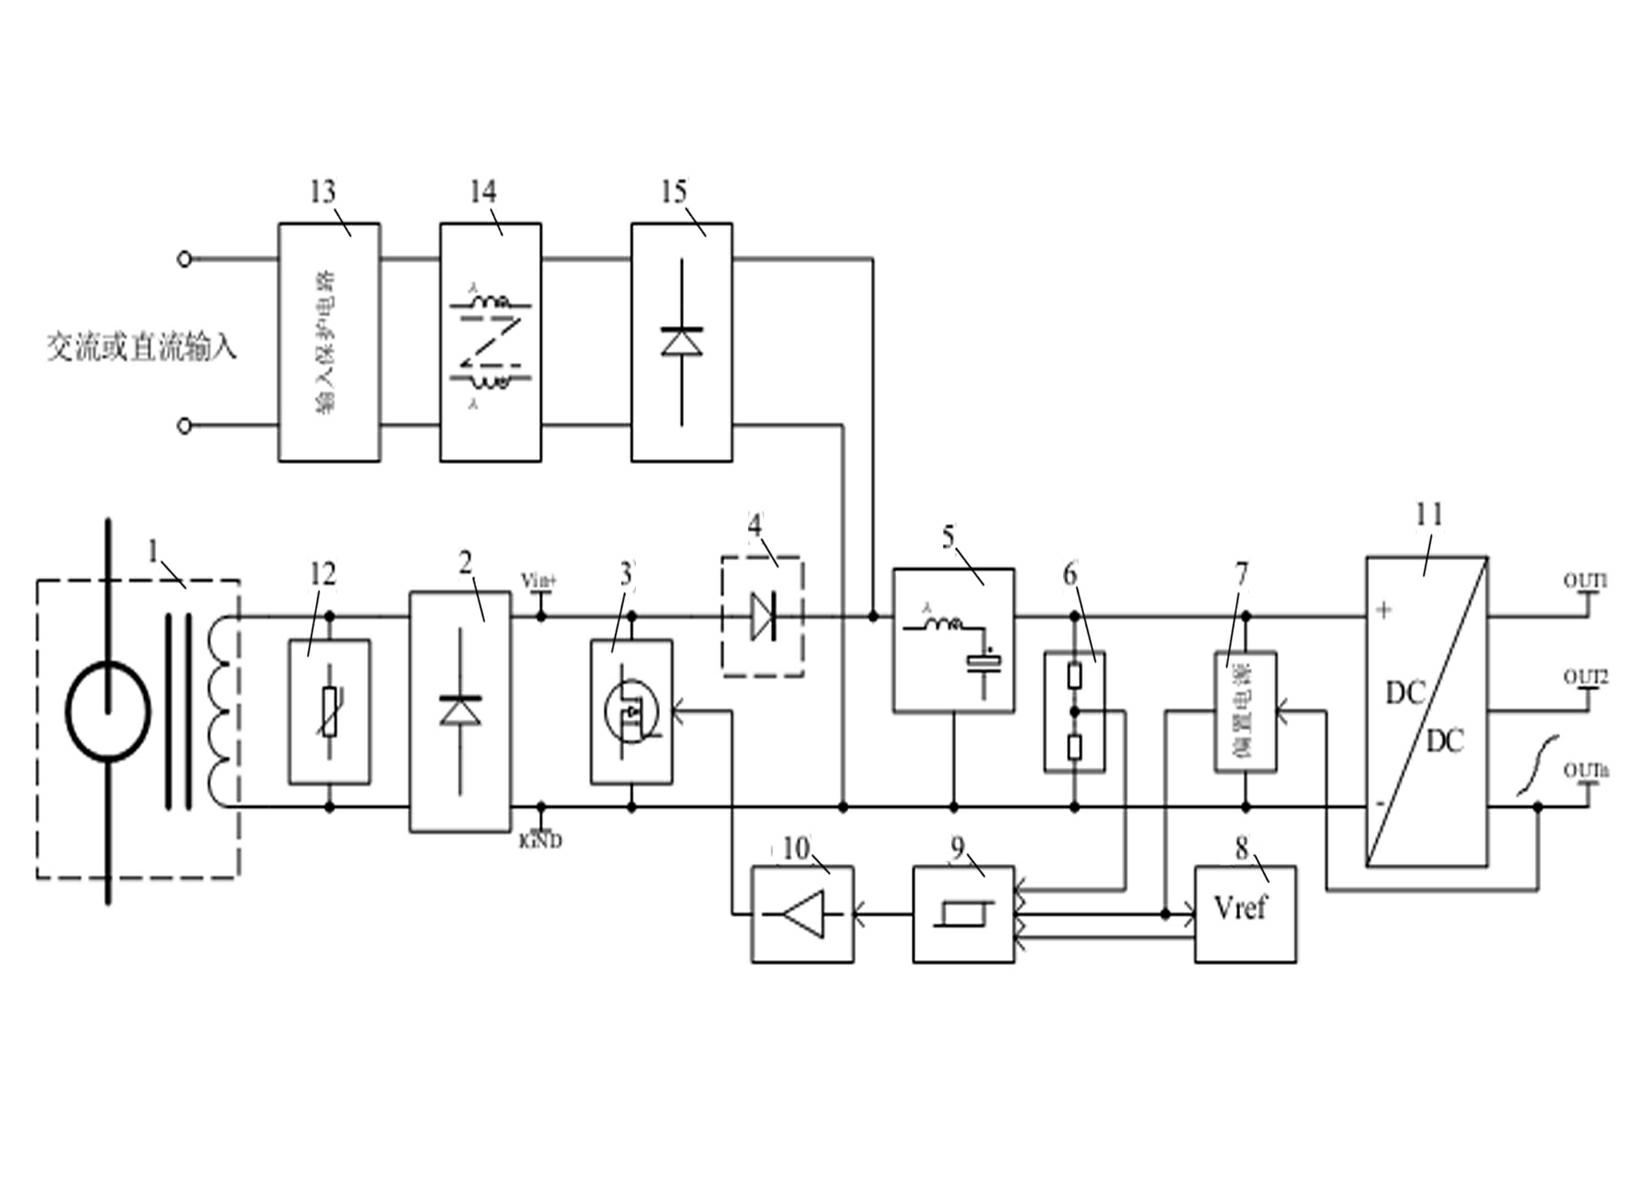 Power supply device of current transformer